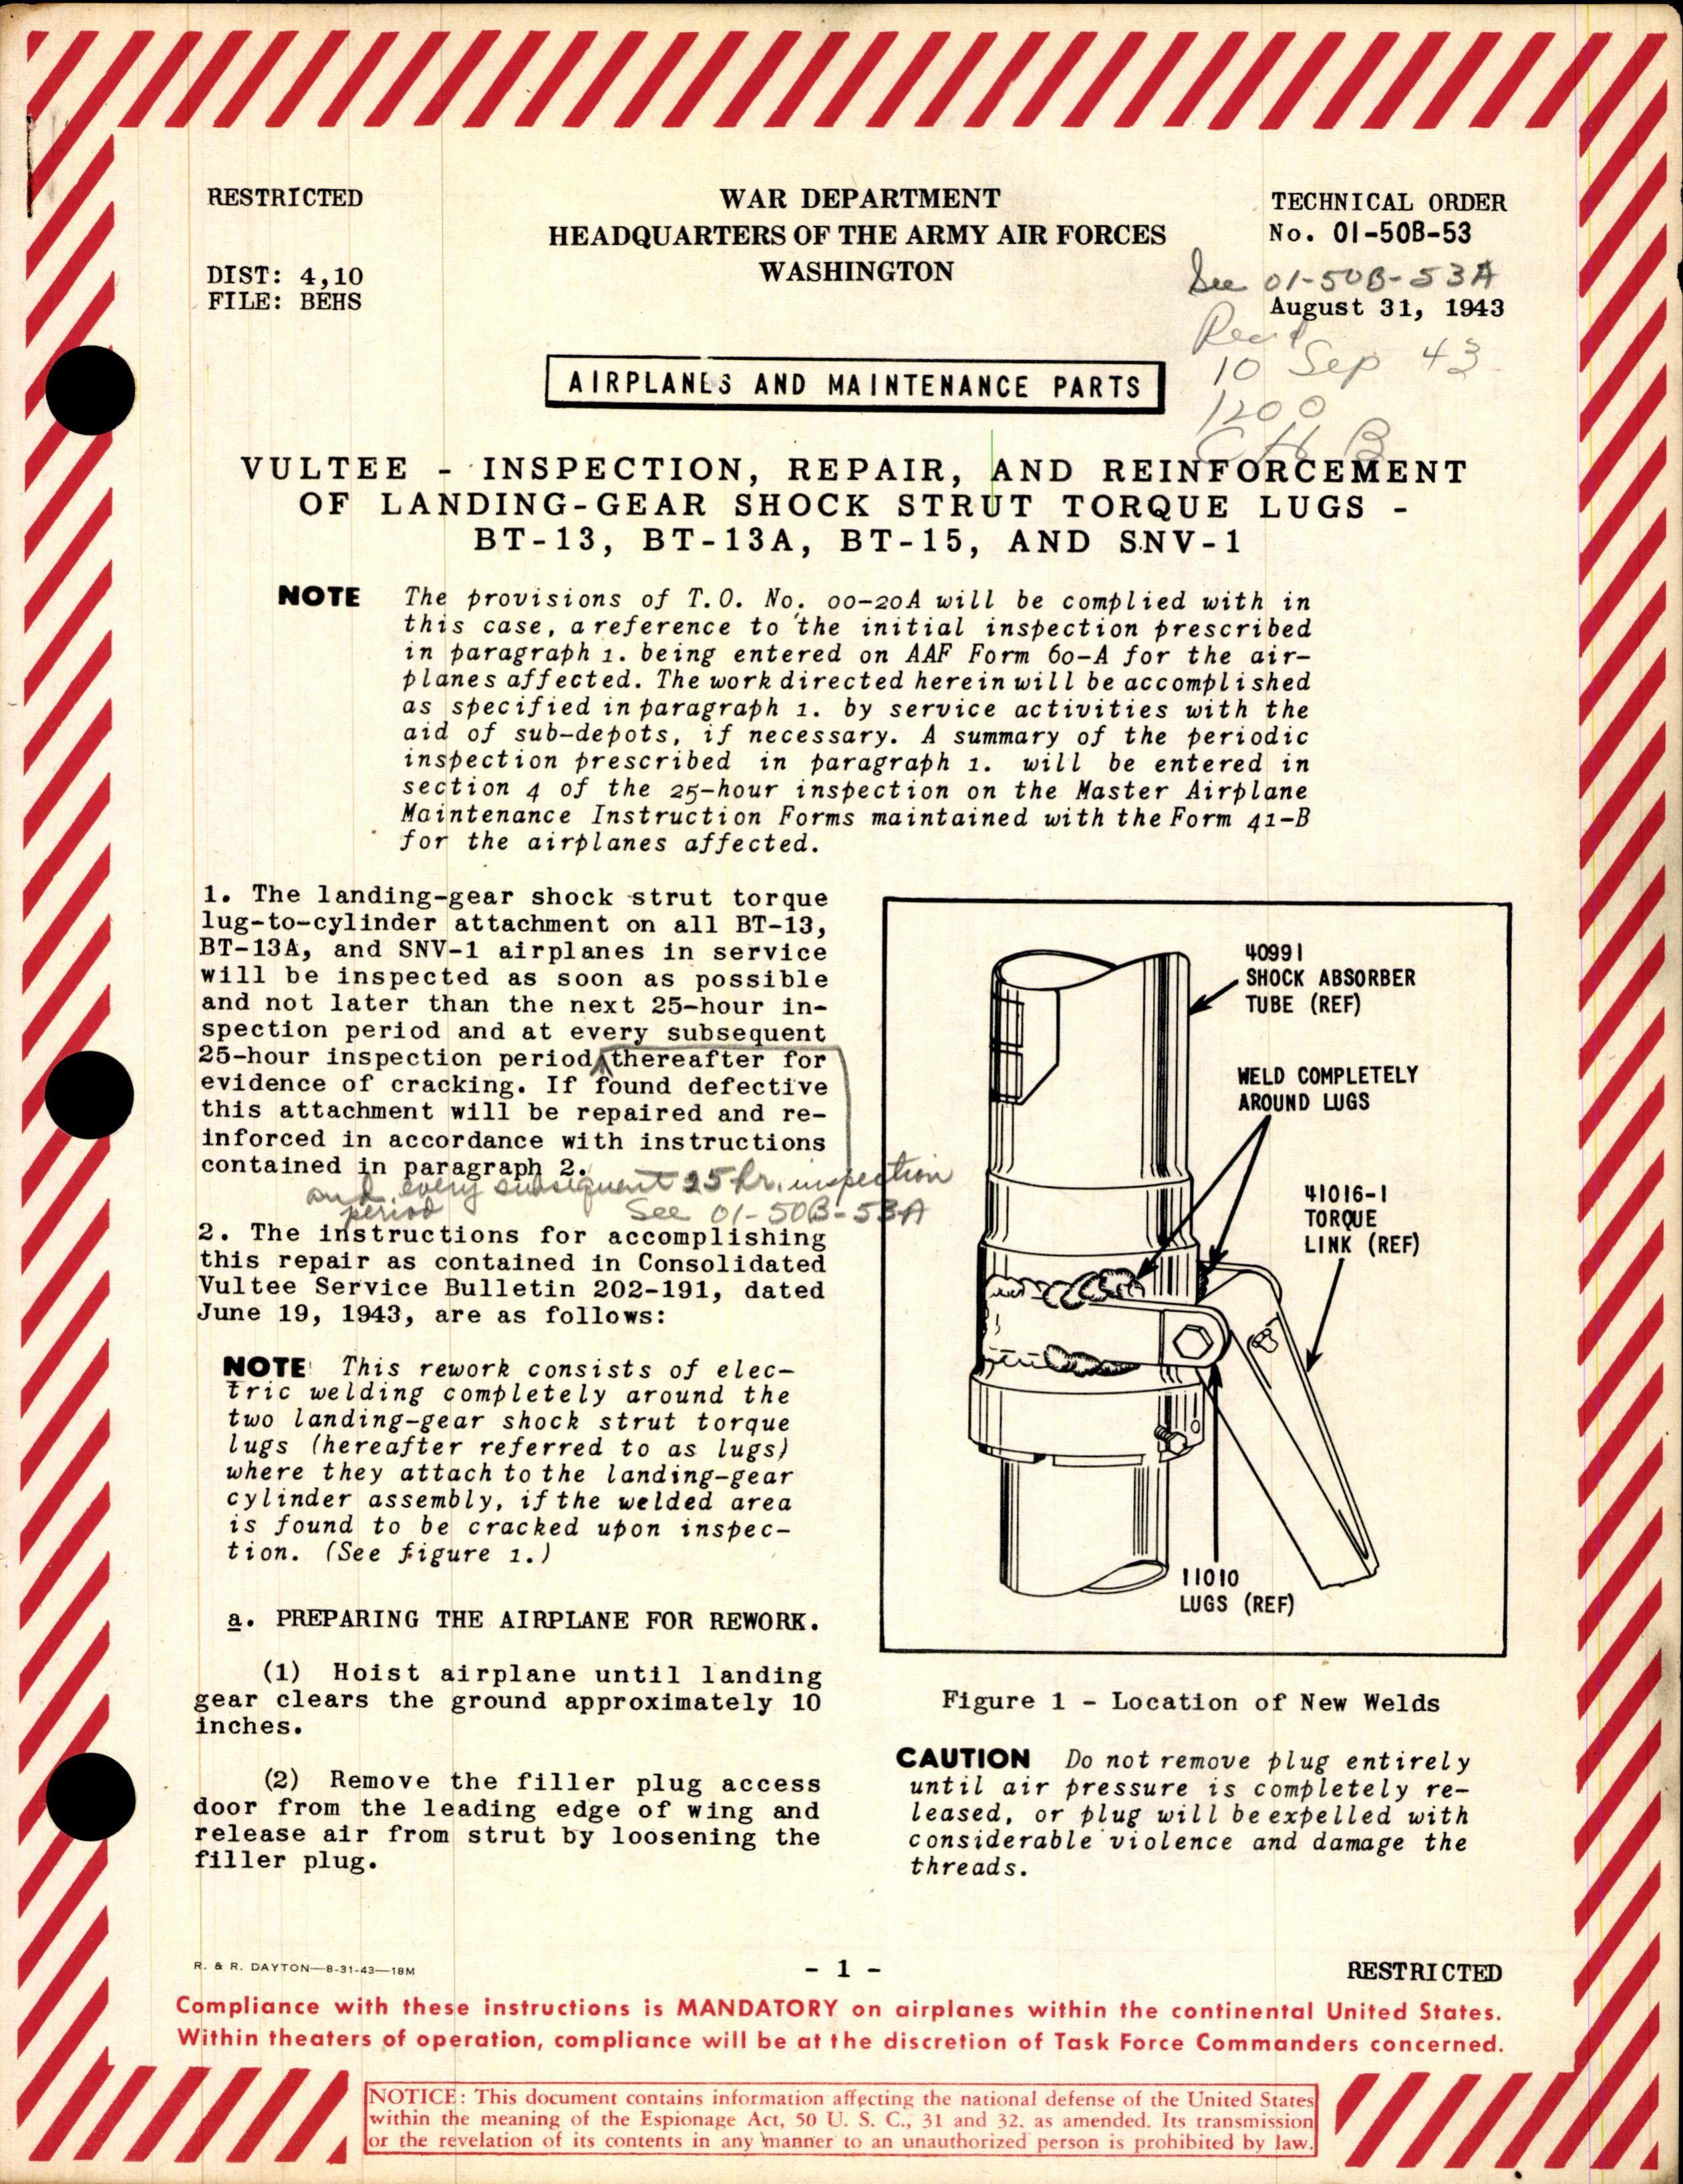 Sample page 1 from AirCorps Library document: Inspection, Repair, and Reinforcement of Landing-Gear Shock Strut Torque Lugs for BT-13